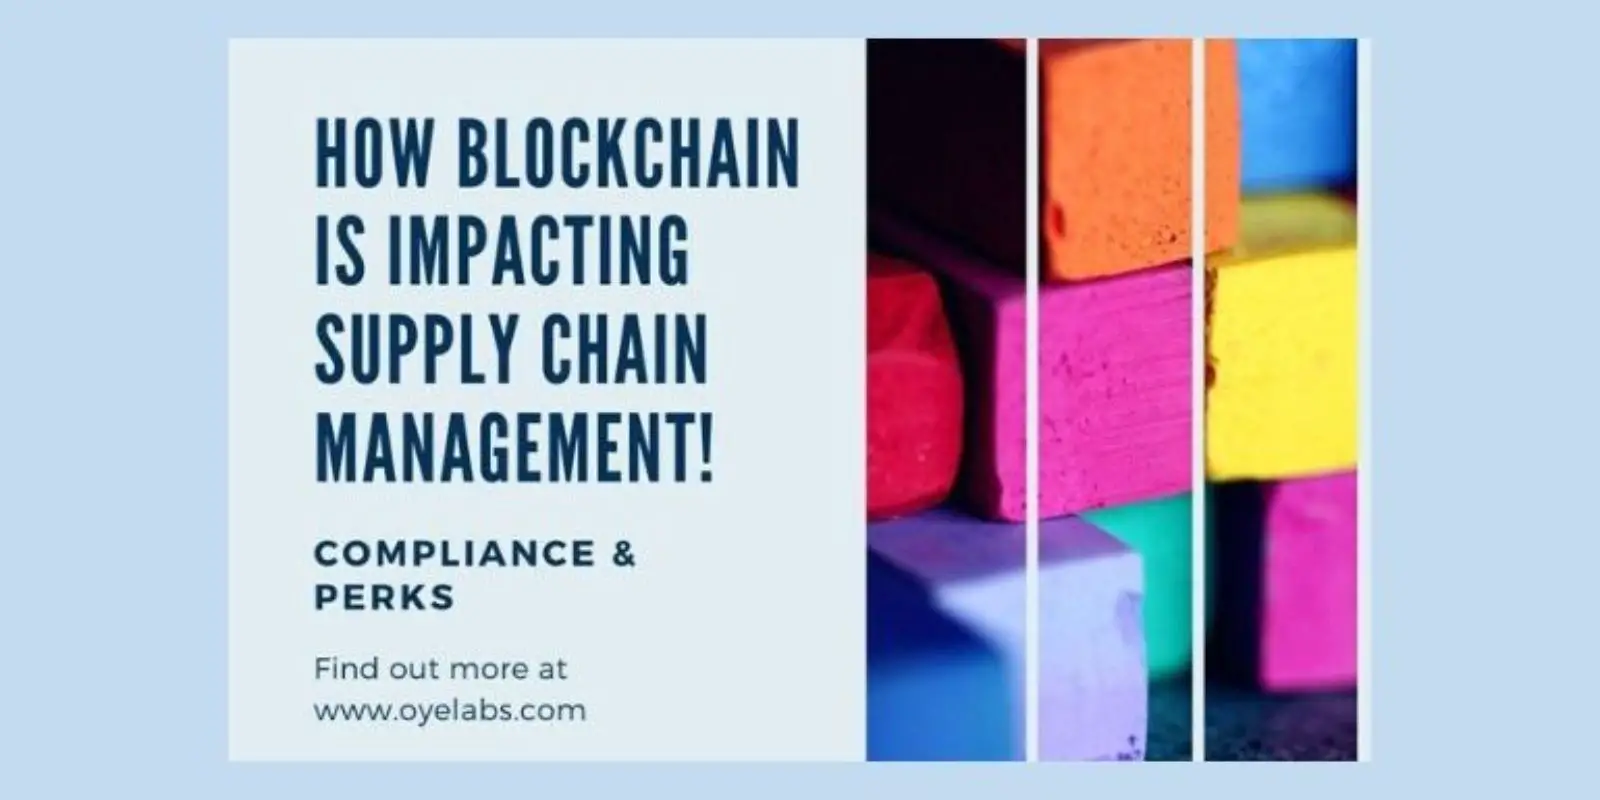 Block by Block: Building Trust in Supply Chain with Blockchain